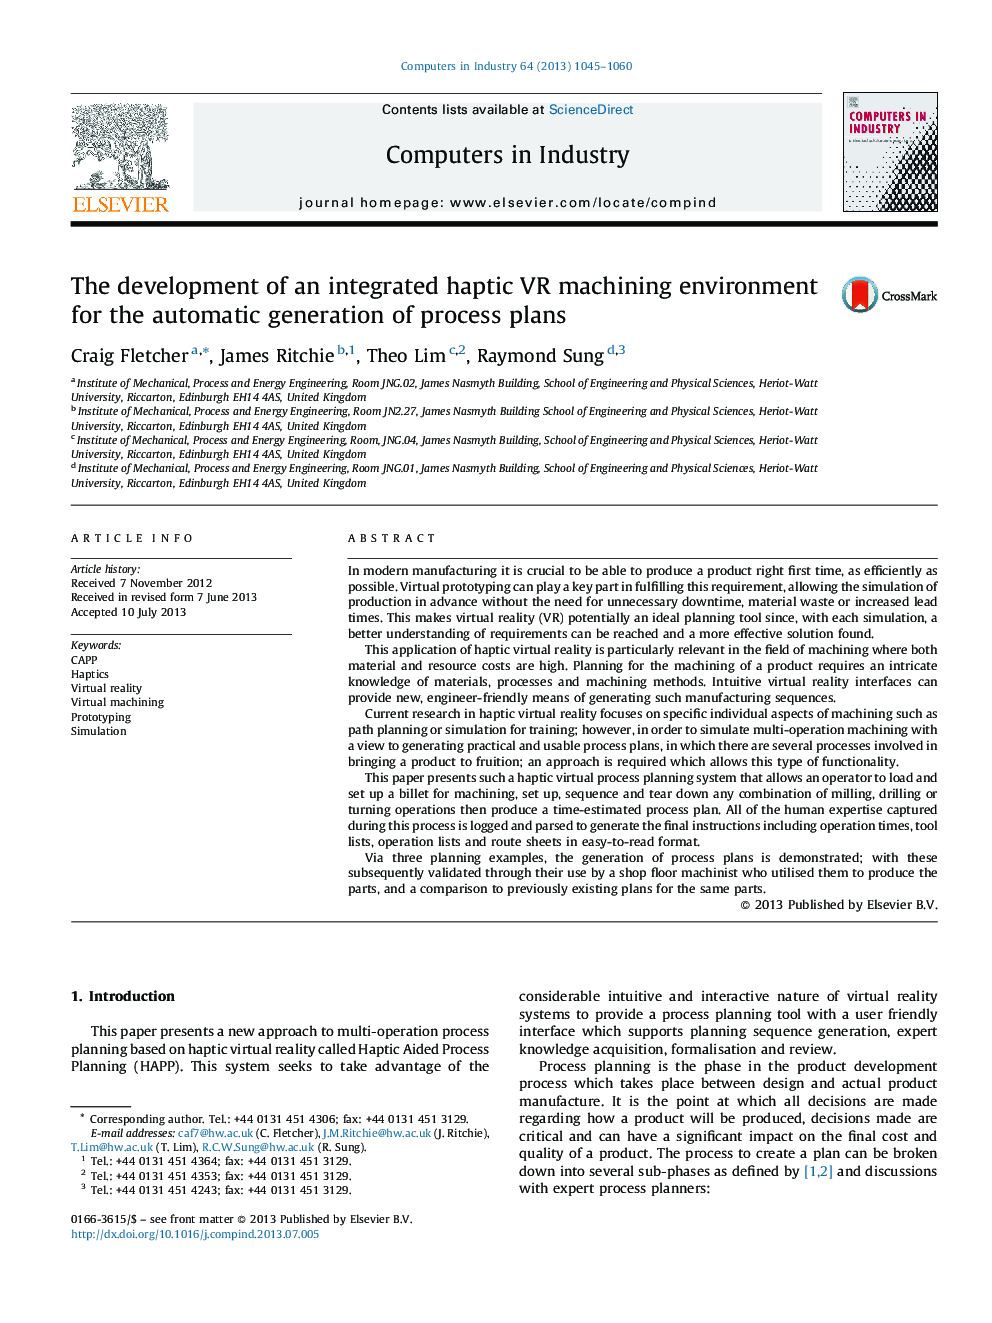 The development of an integrated haptic VR machining environment for the automatic generation of process plans